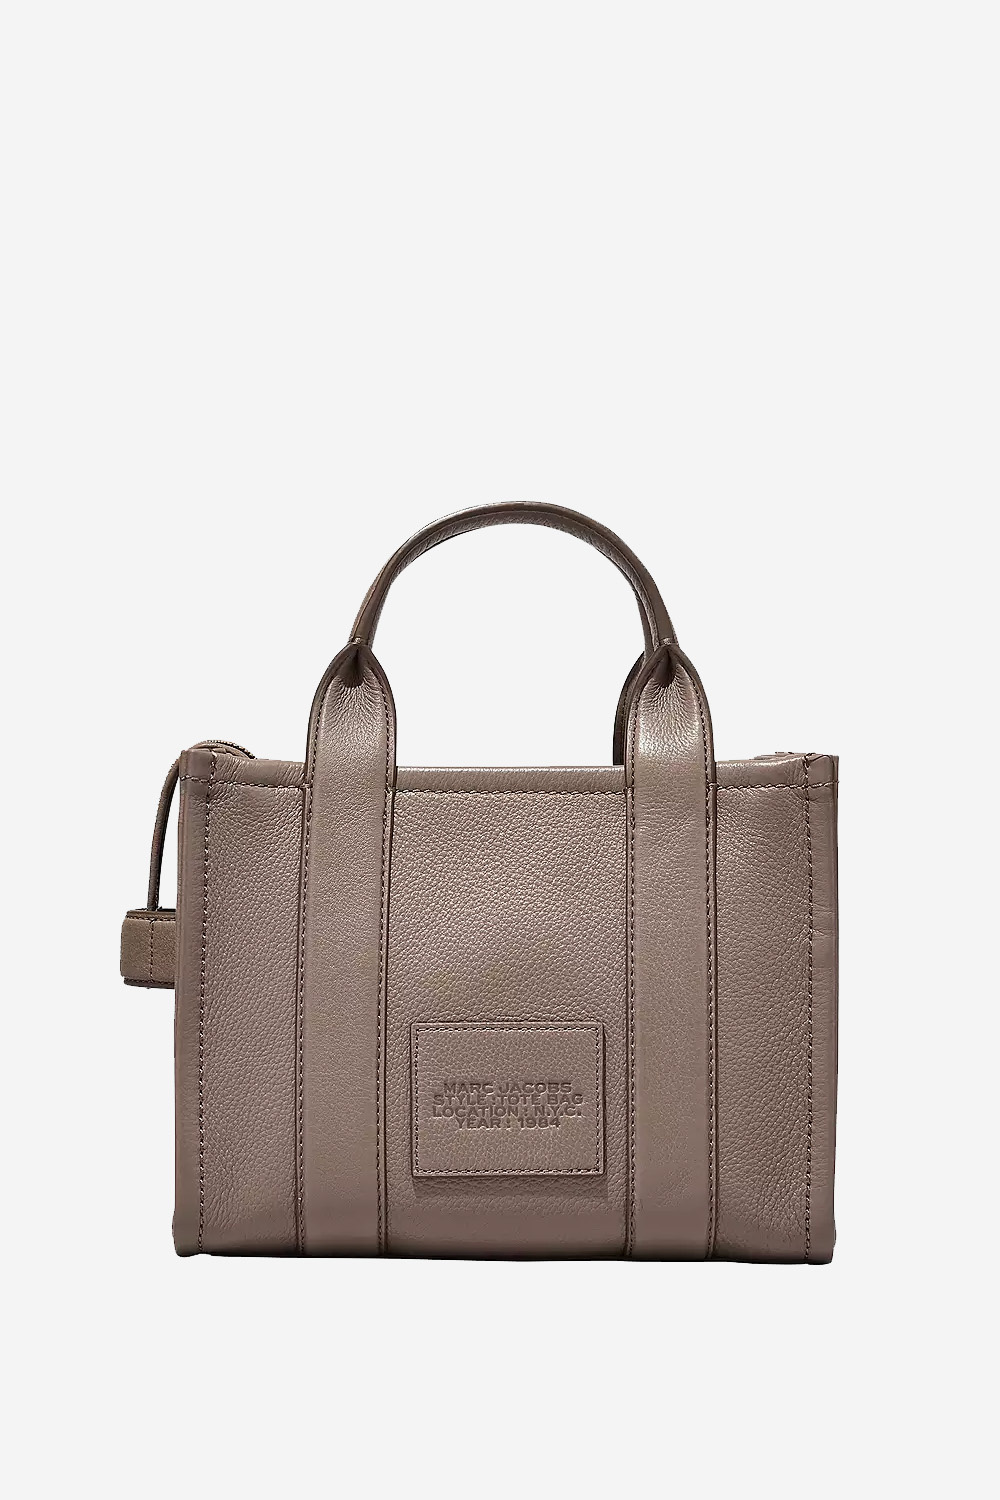 Marc Jacobs Tote bag Taupe